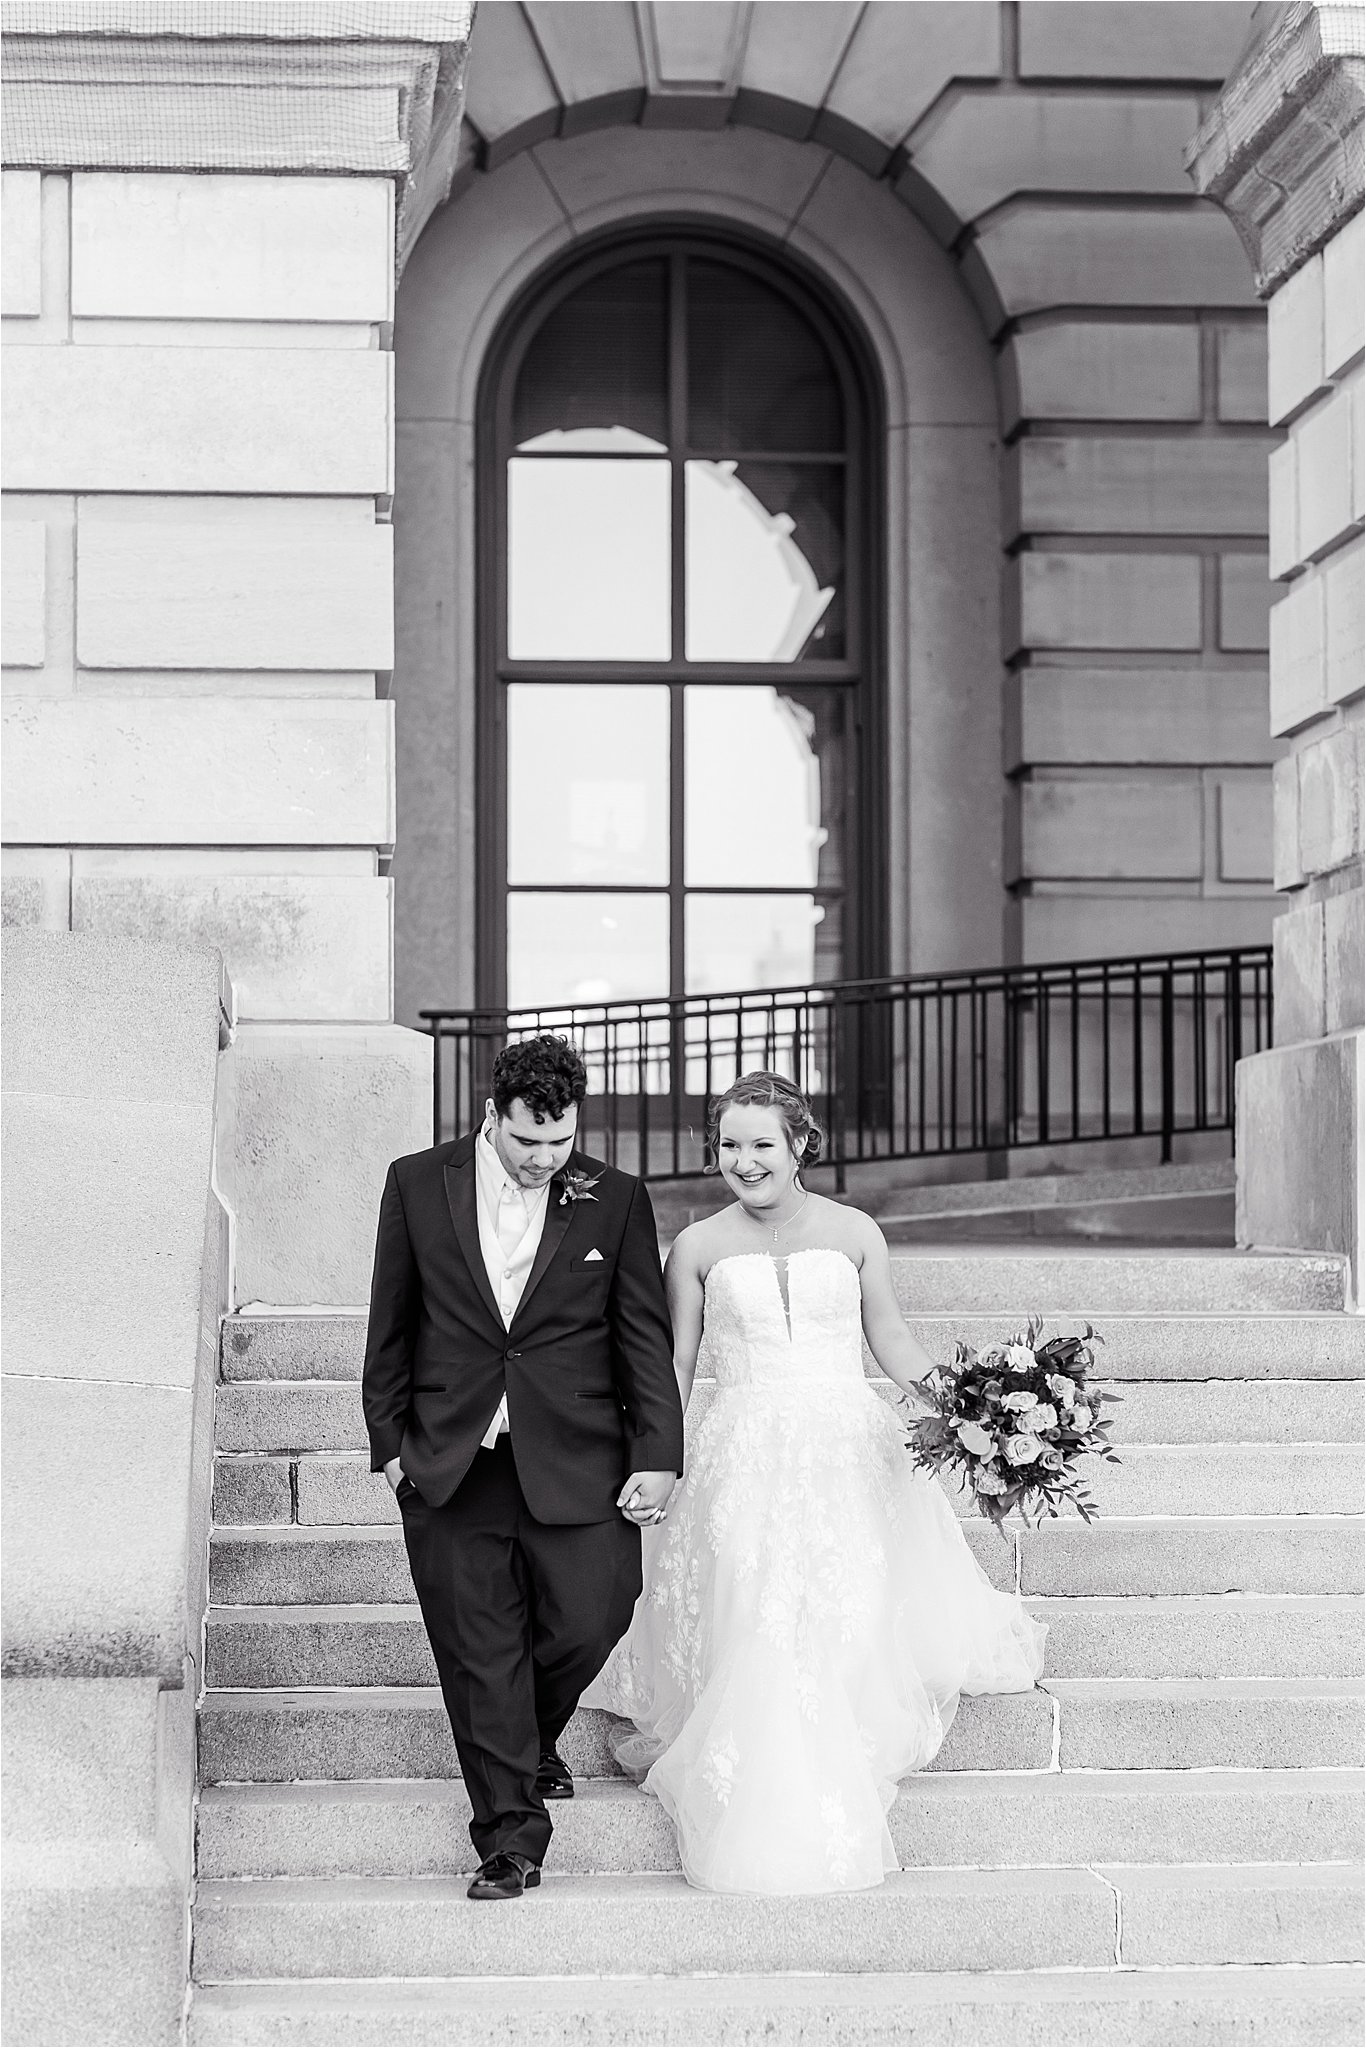 Bride and groom at Illinois State Capitol Springfield Illinois wedding by Karen Shoufler